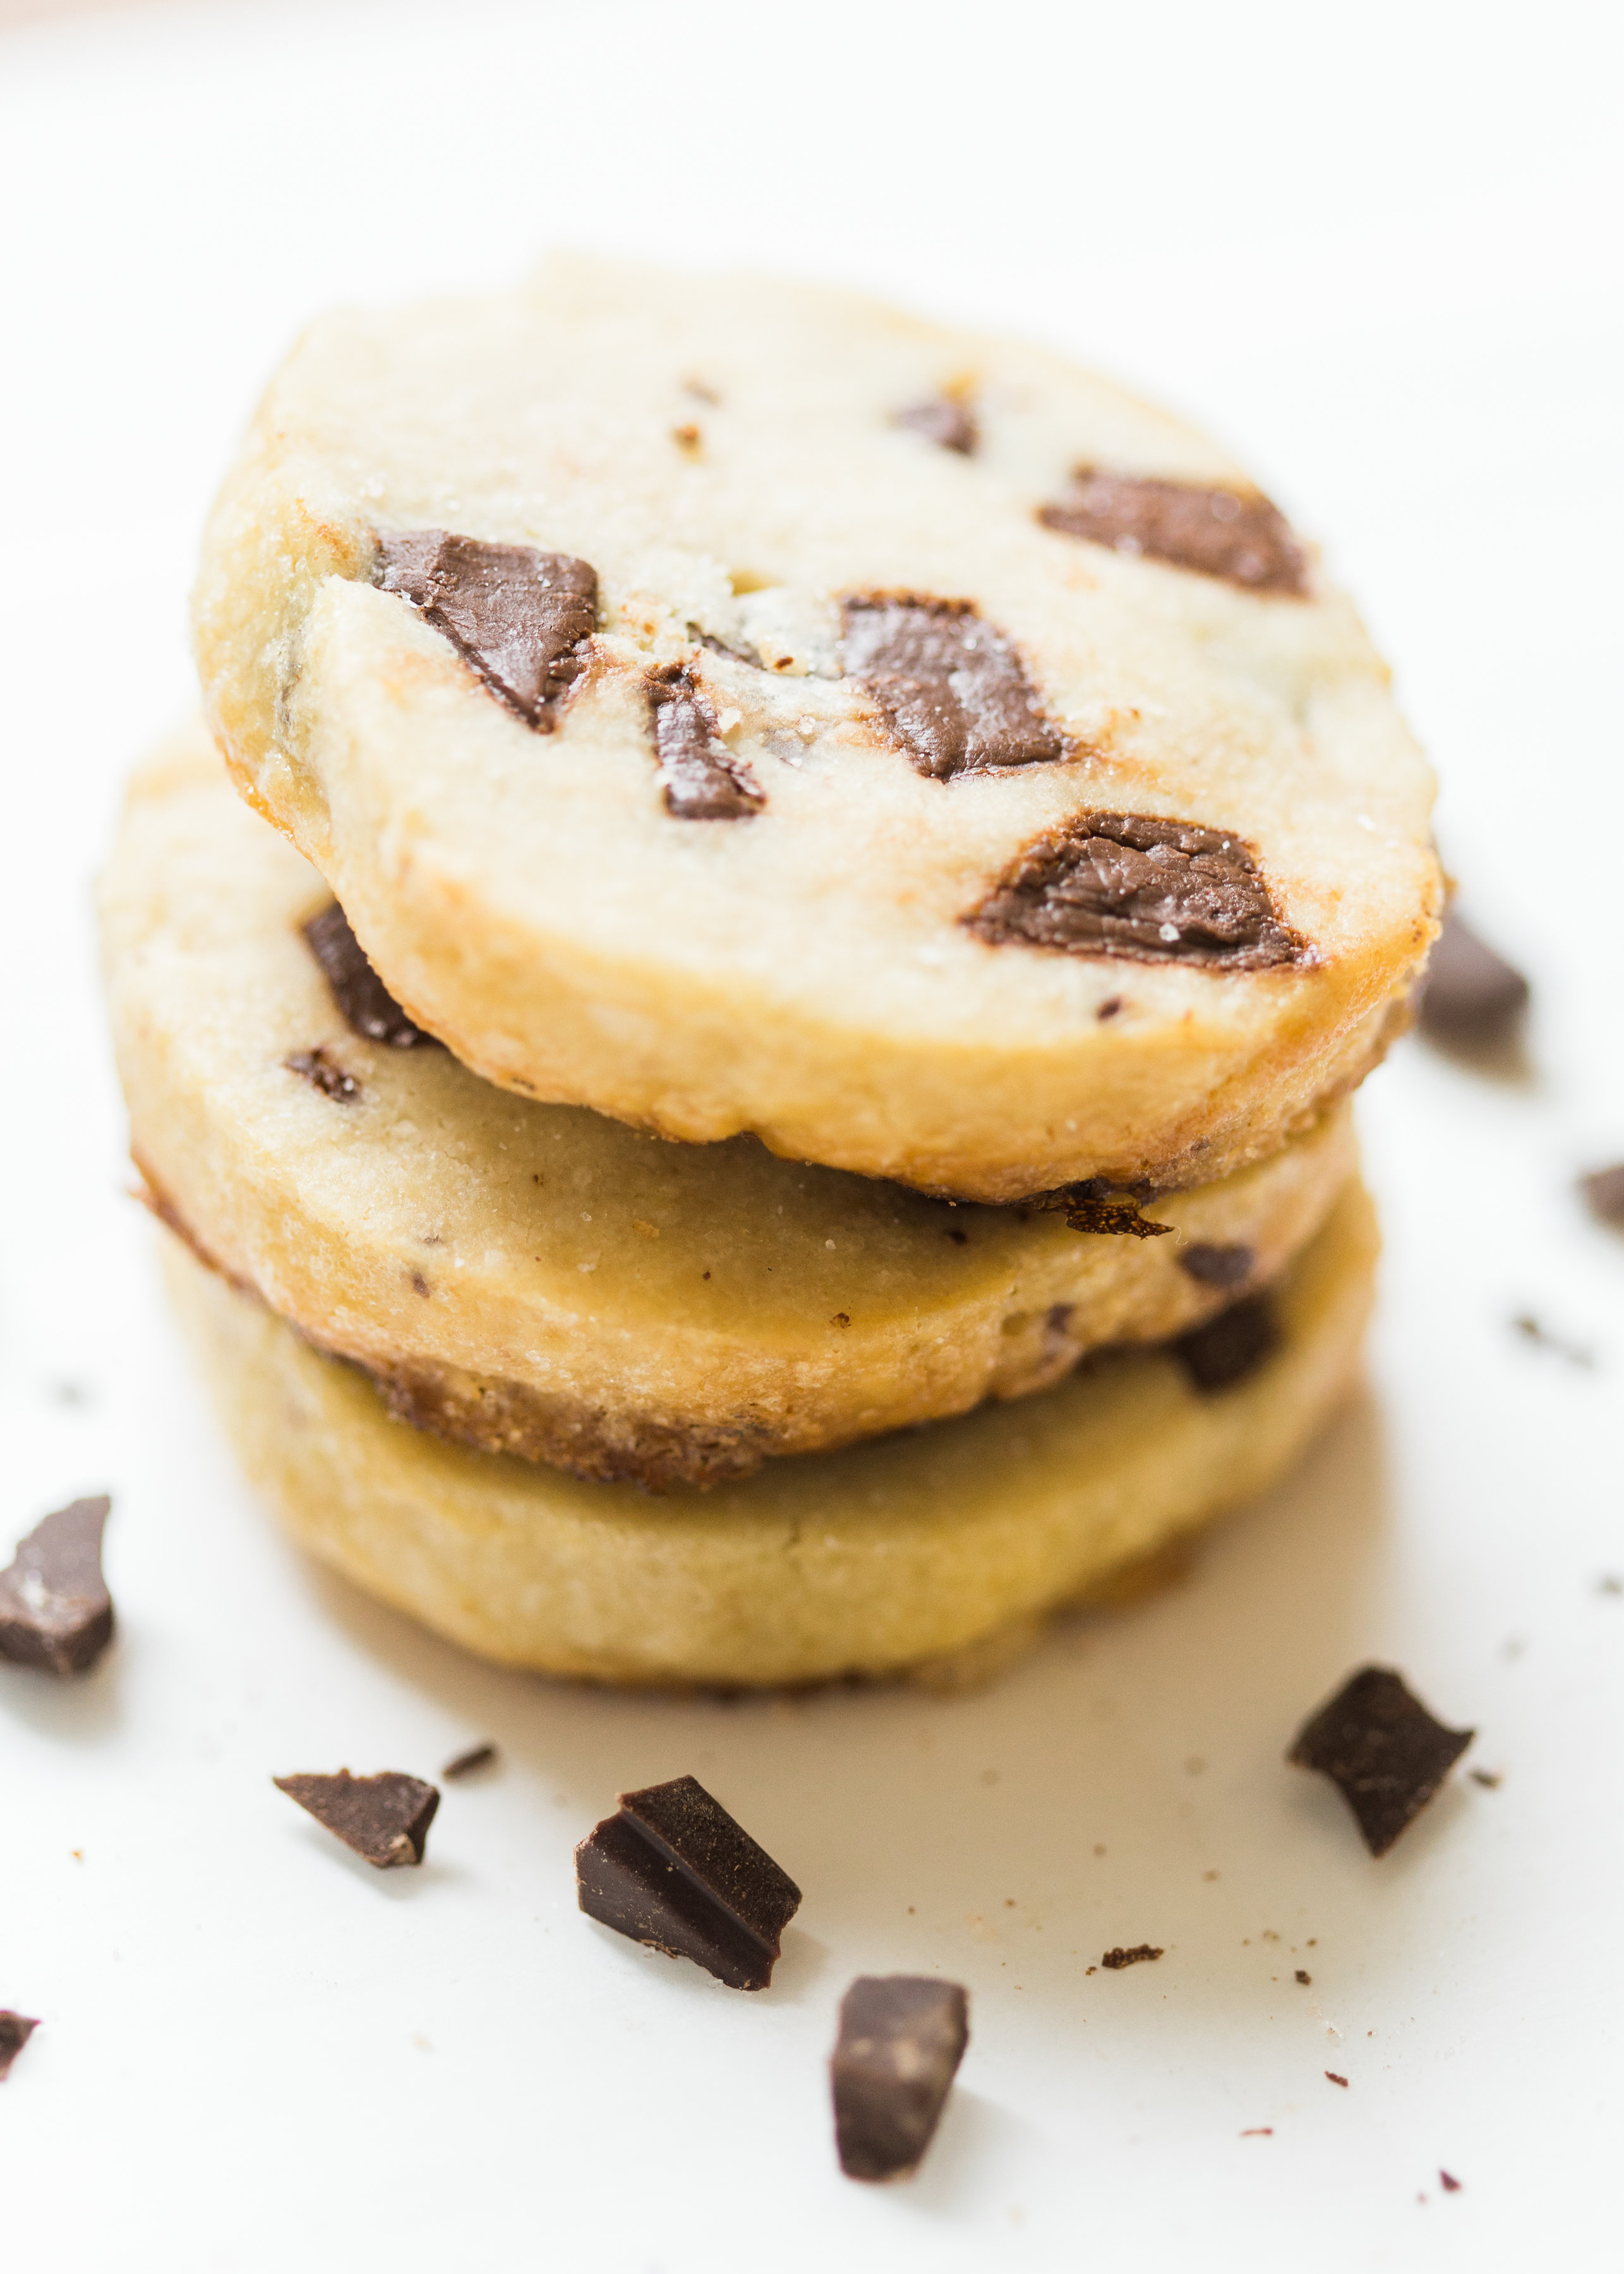 Looking for a crazy amazing cookie #recipe? You HAVE to make the super famous salted butter chocolate chunk shortbread cookies from Alyson Roman that are blowing up Instagram these days ... and I'm showing you how! #shortbreadcookies #chocolatechunkshortbreadcookies #cookies #cookierecipe | glitterinc.com | @glitterinc